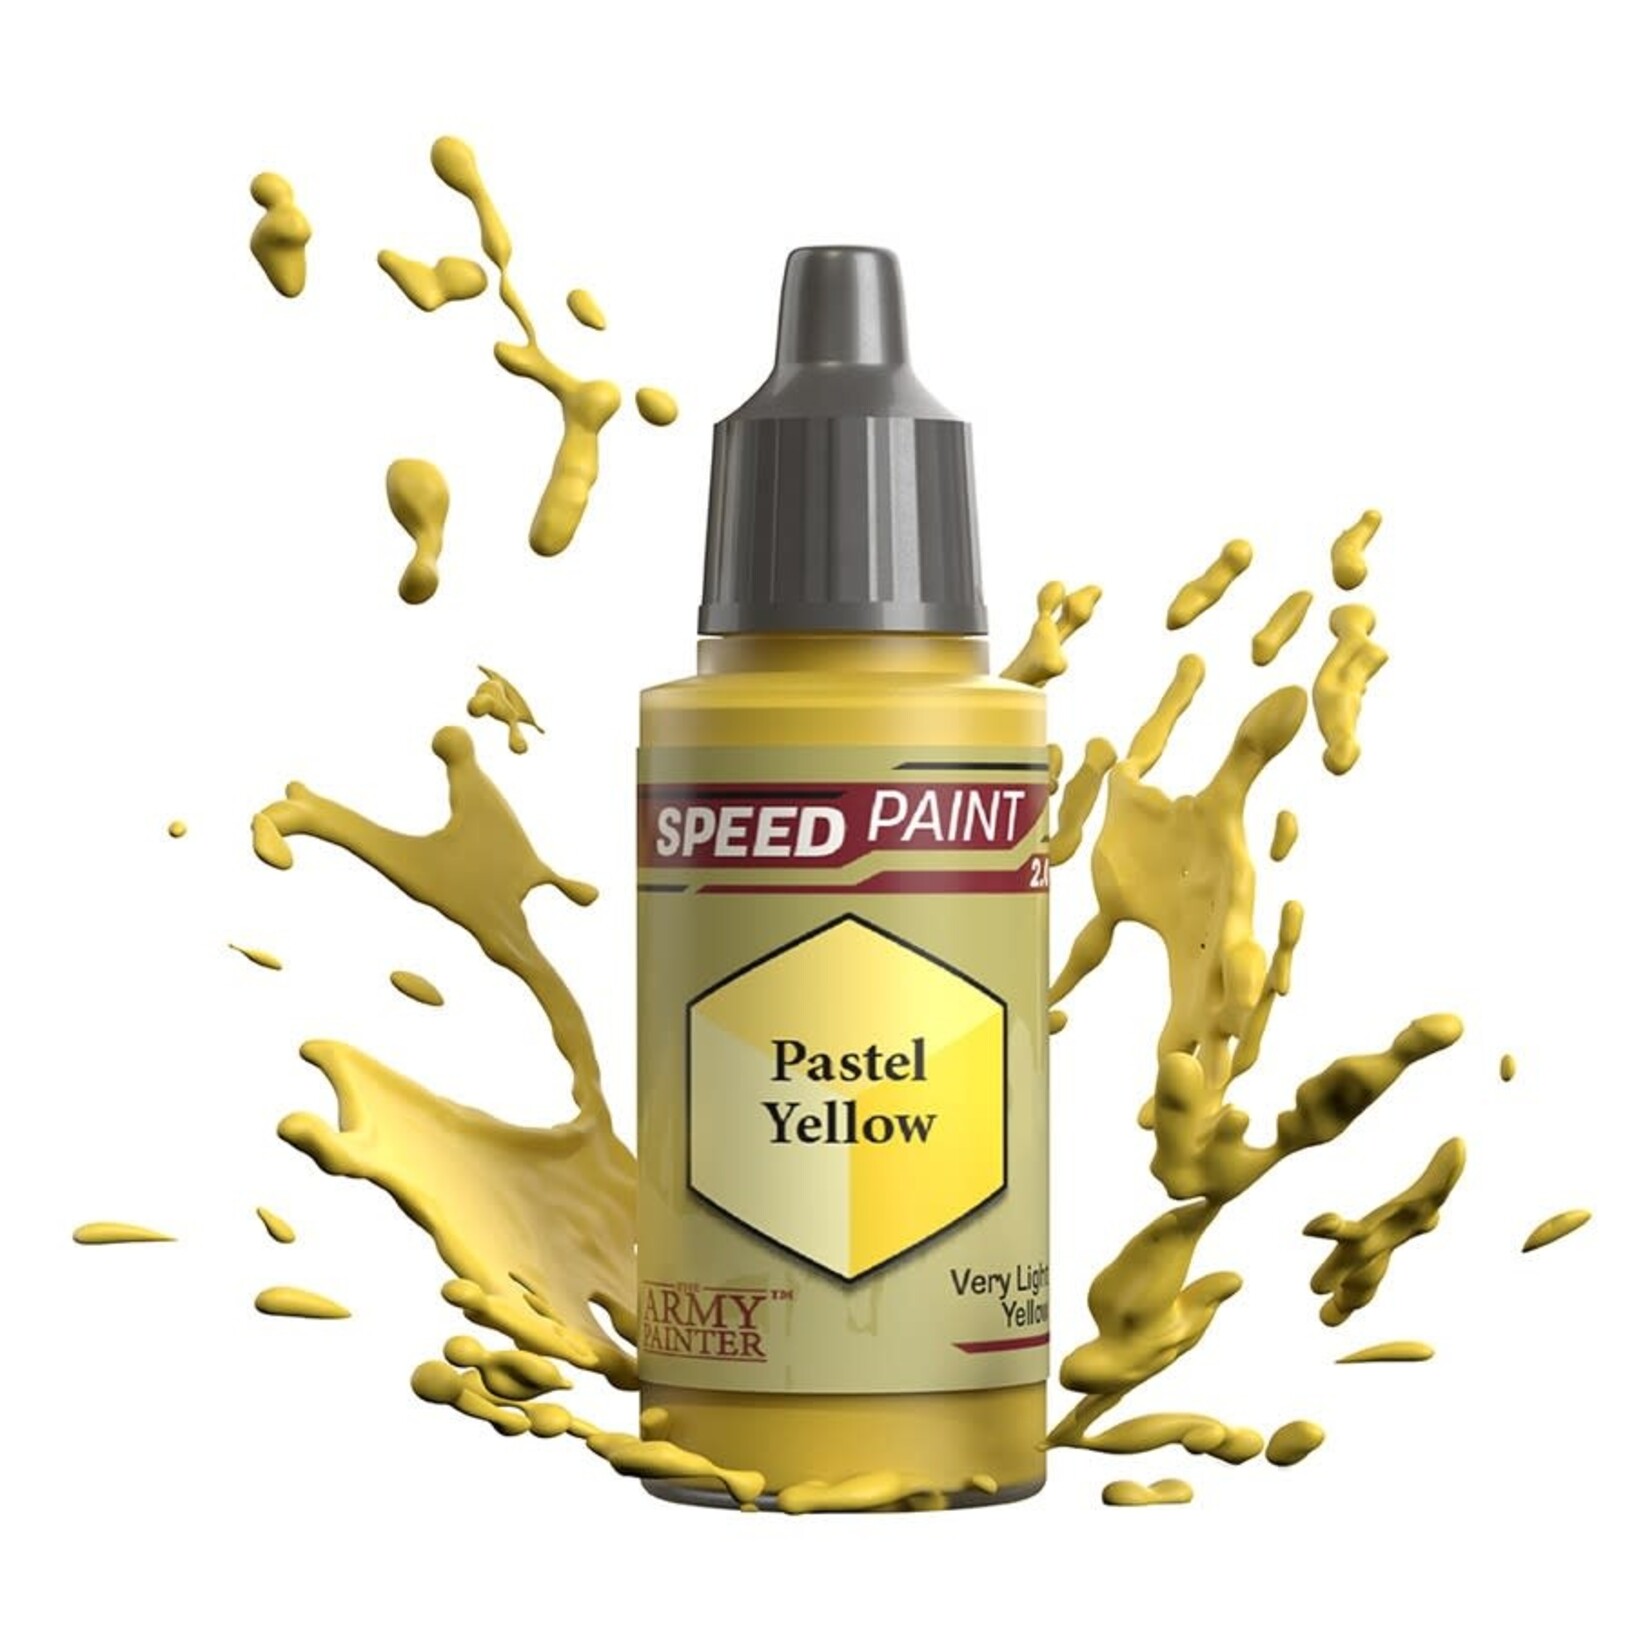 The Army Painter The Army Painter Pastel Yellow 18ml